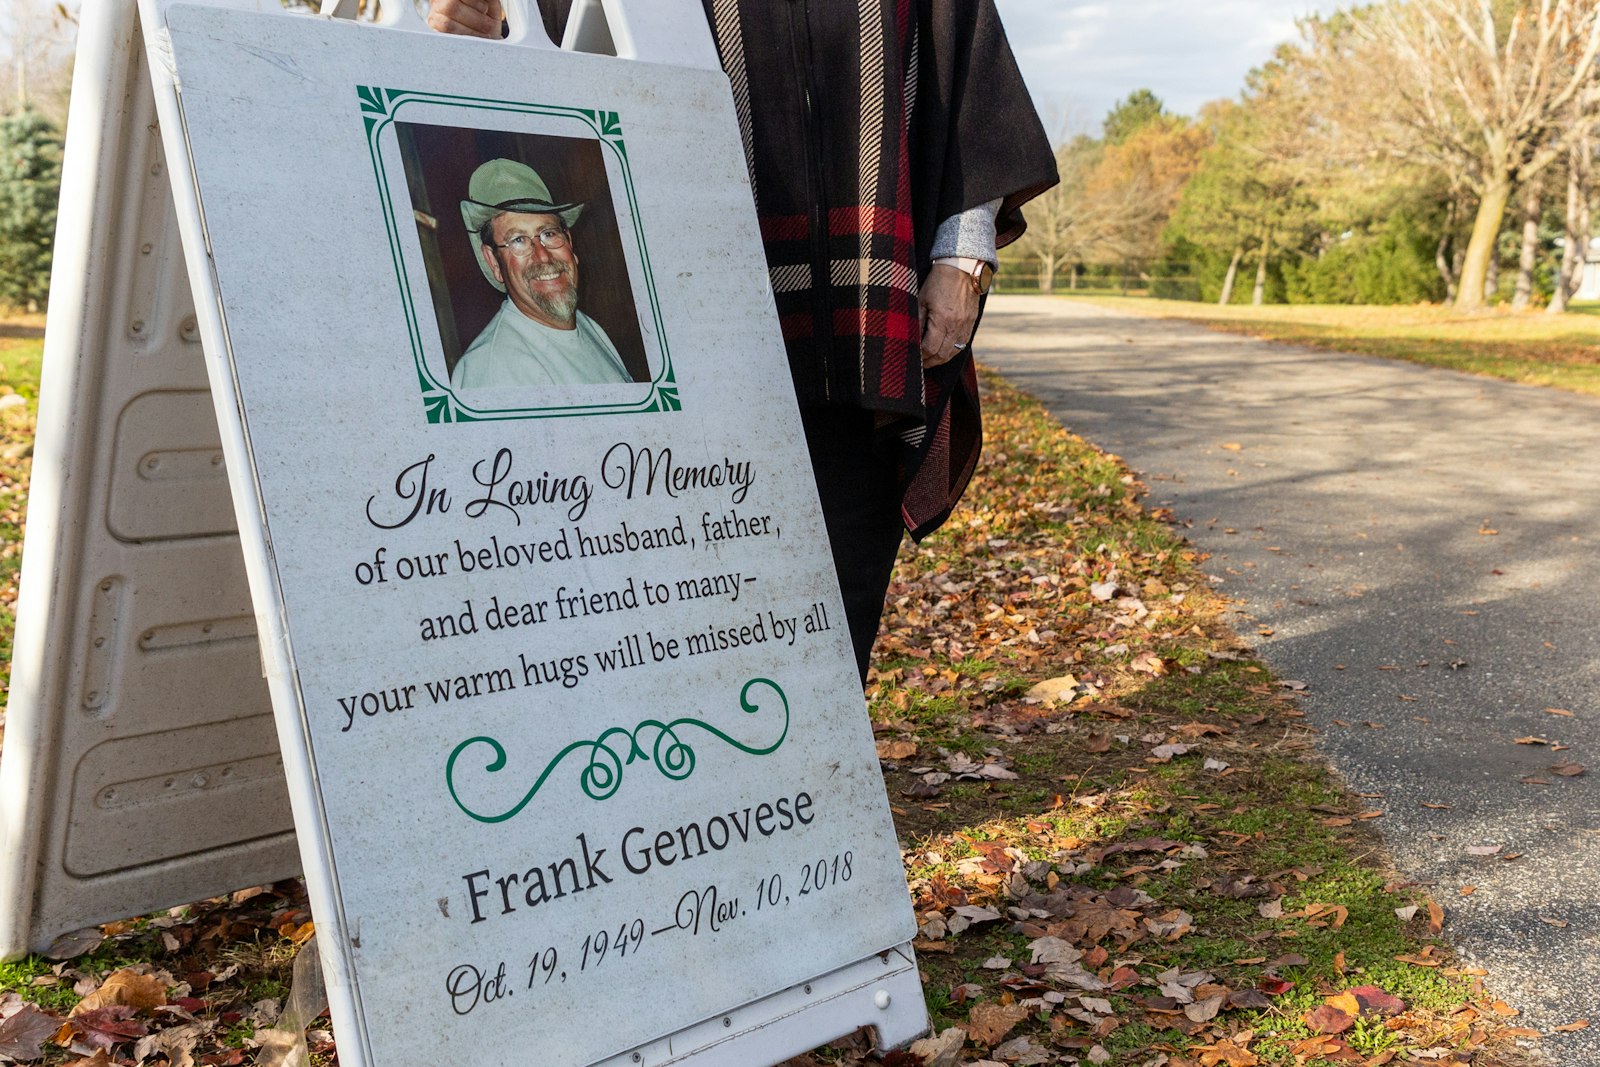 A sign in memory of Frank Genovese is displayed for visitors near the entrance to Candy Cane Christmas Tree Farm.